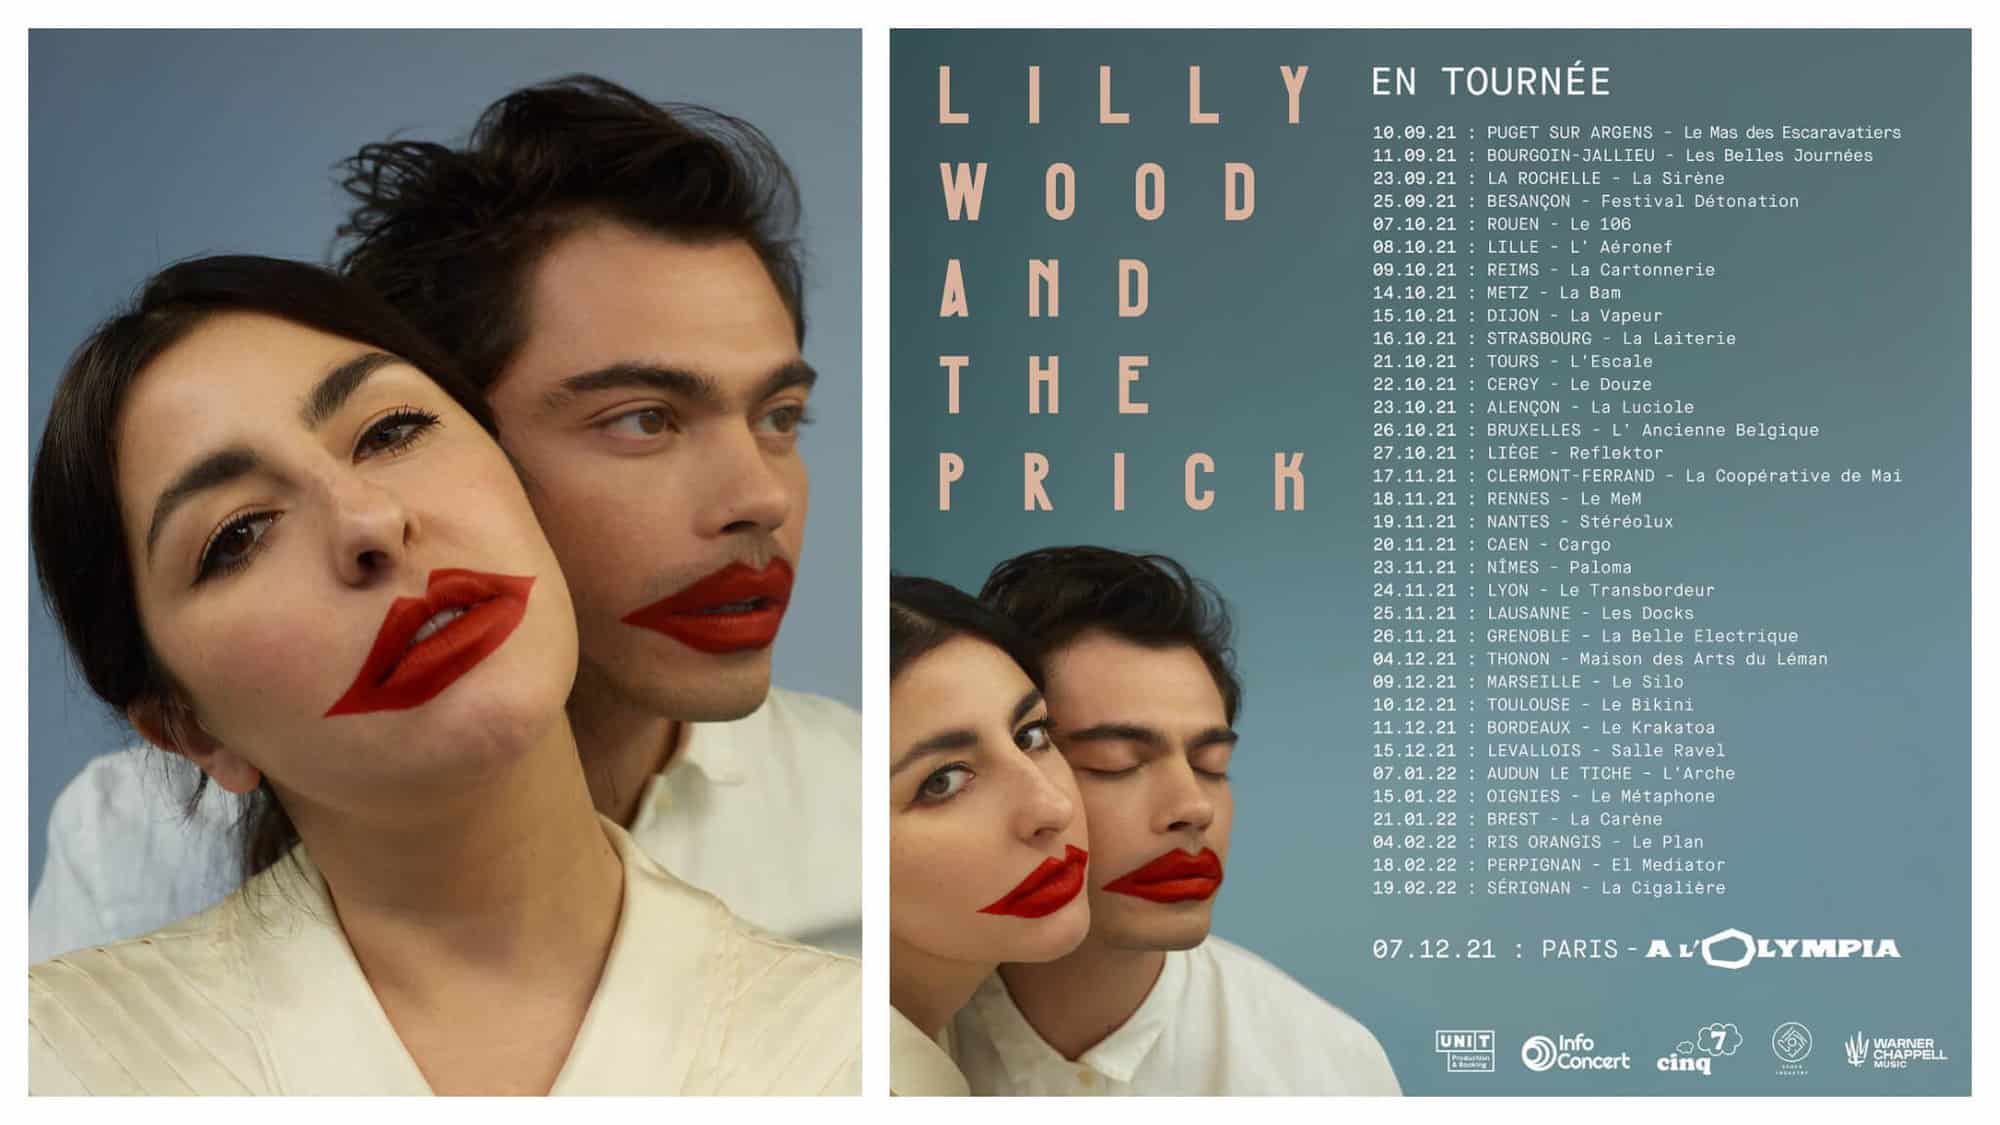 Promotional posters for Lilly Wood and the Prick, including tour dates in France.